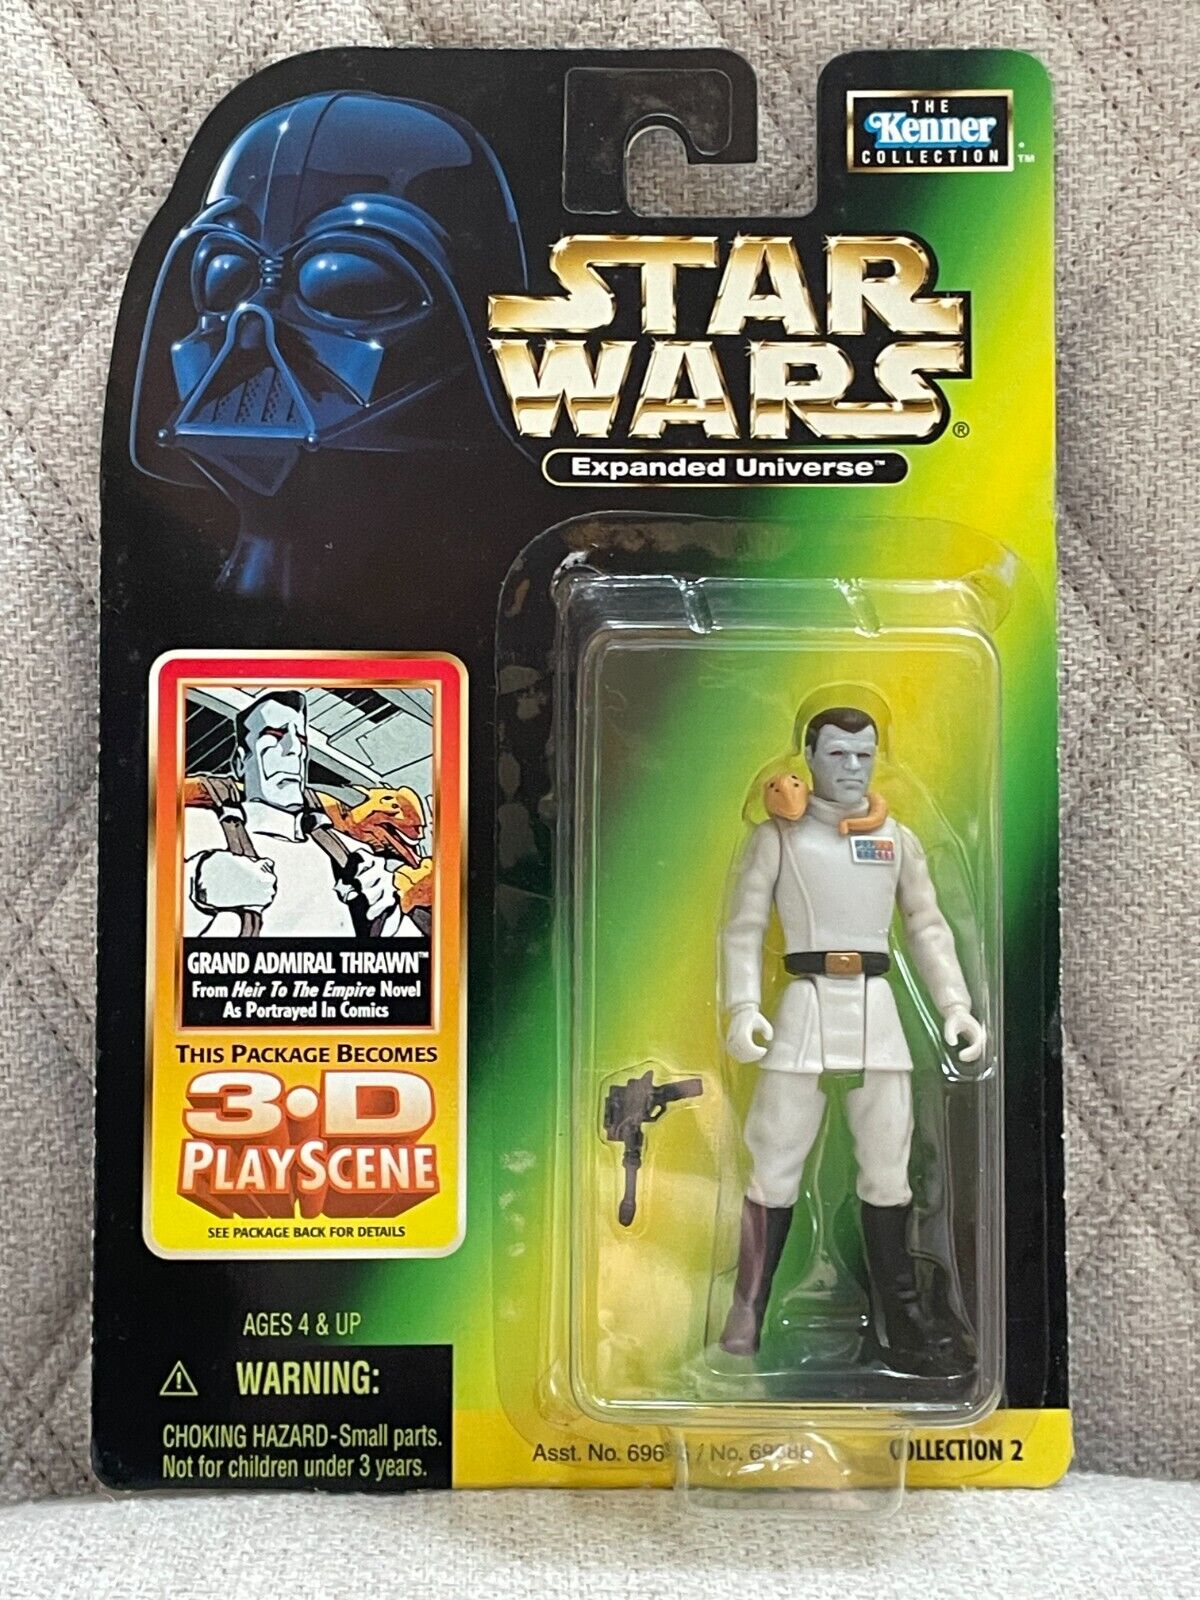 VINTAGE 1998 STAR WARS EXPANDED UNIVERSE GRAND ADMIRAL THRAWN ACTION FIGURE NEW